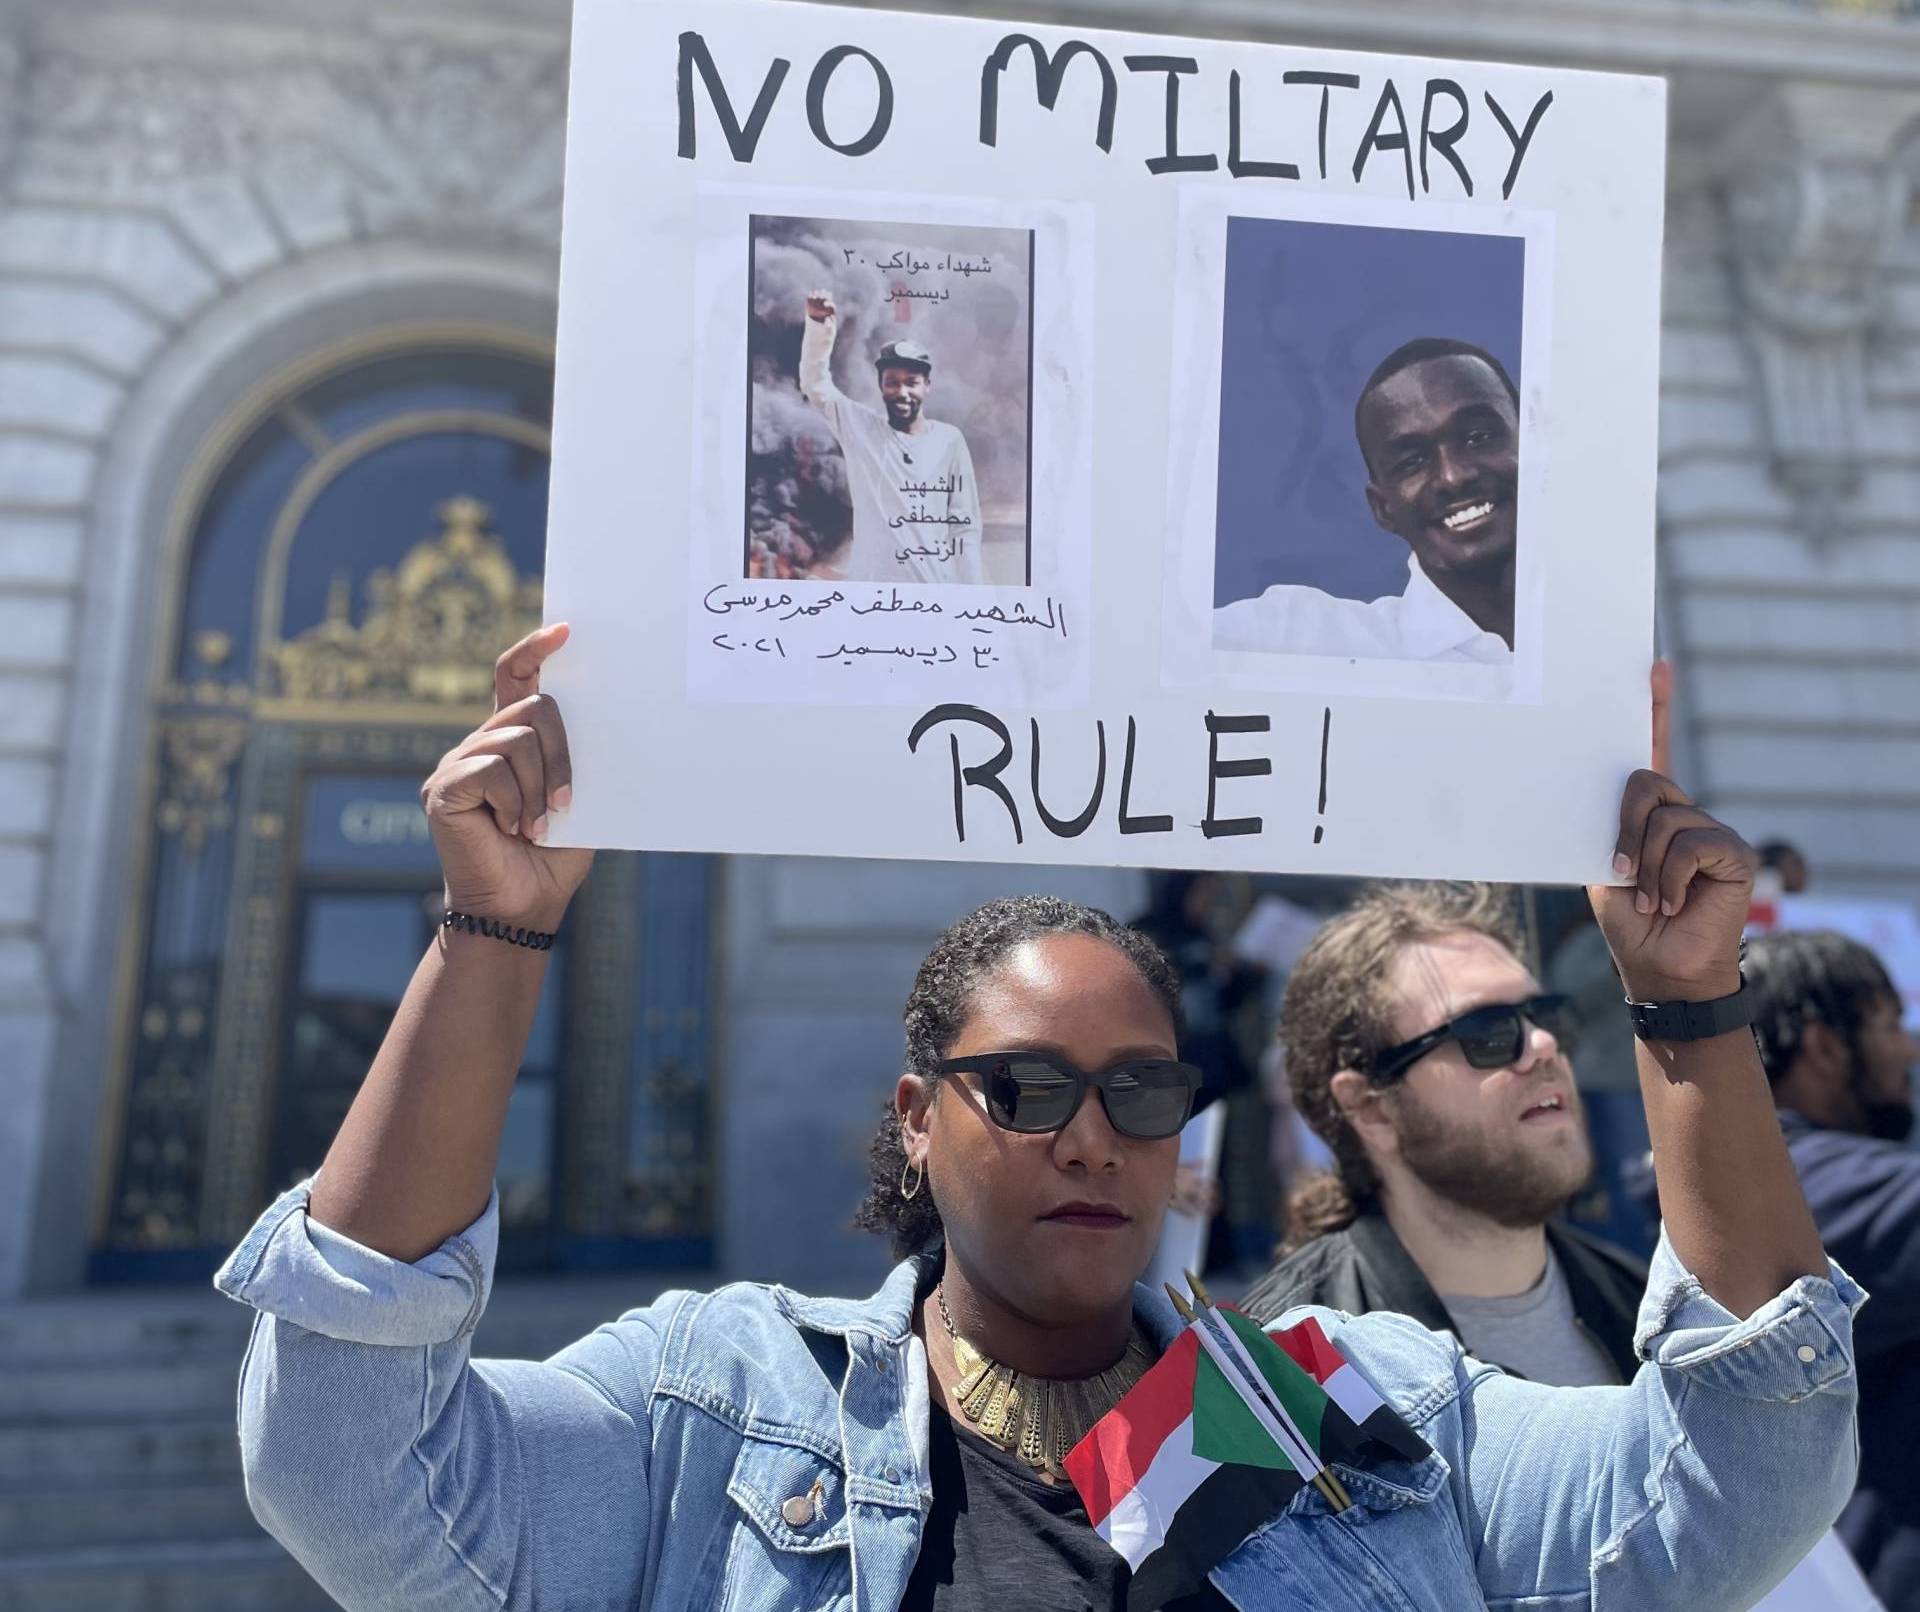 A Sudanese American woman holds a sign that reads "No Military Rule" outside SF City Hall.